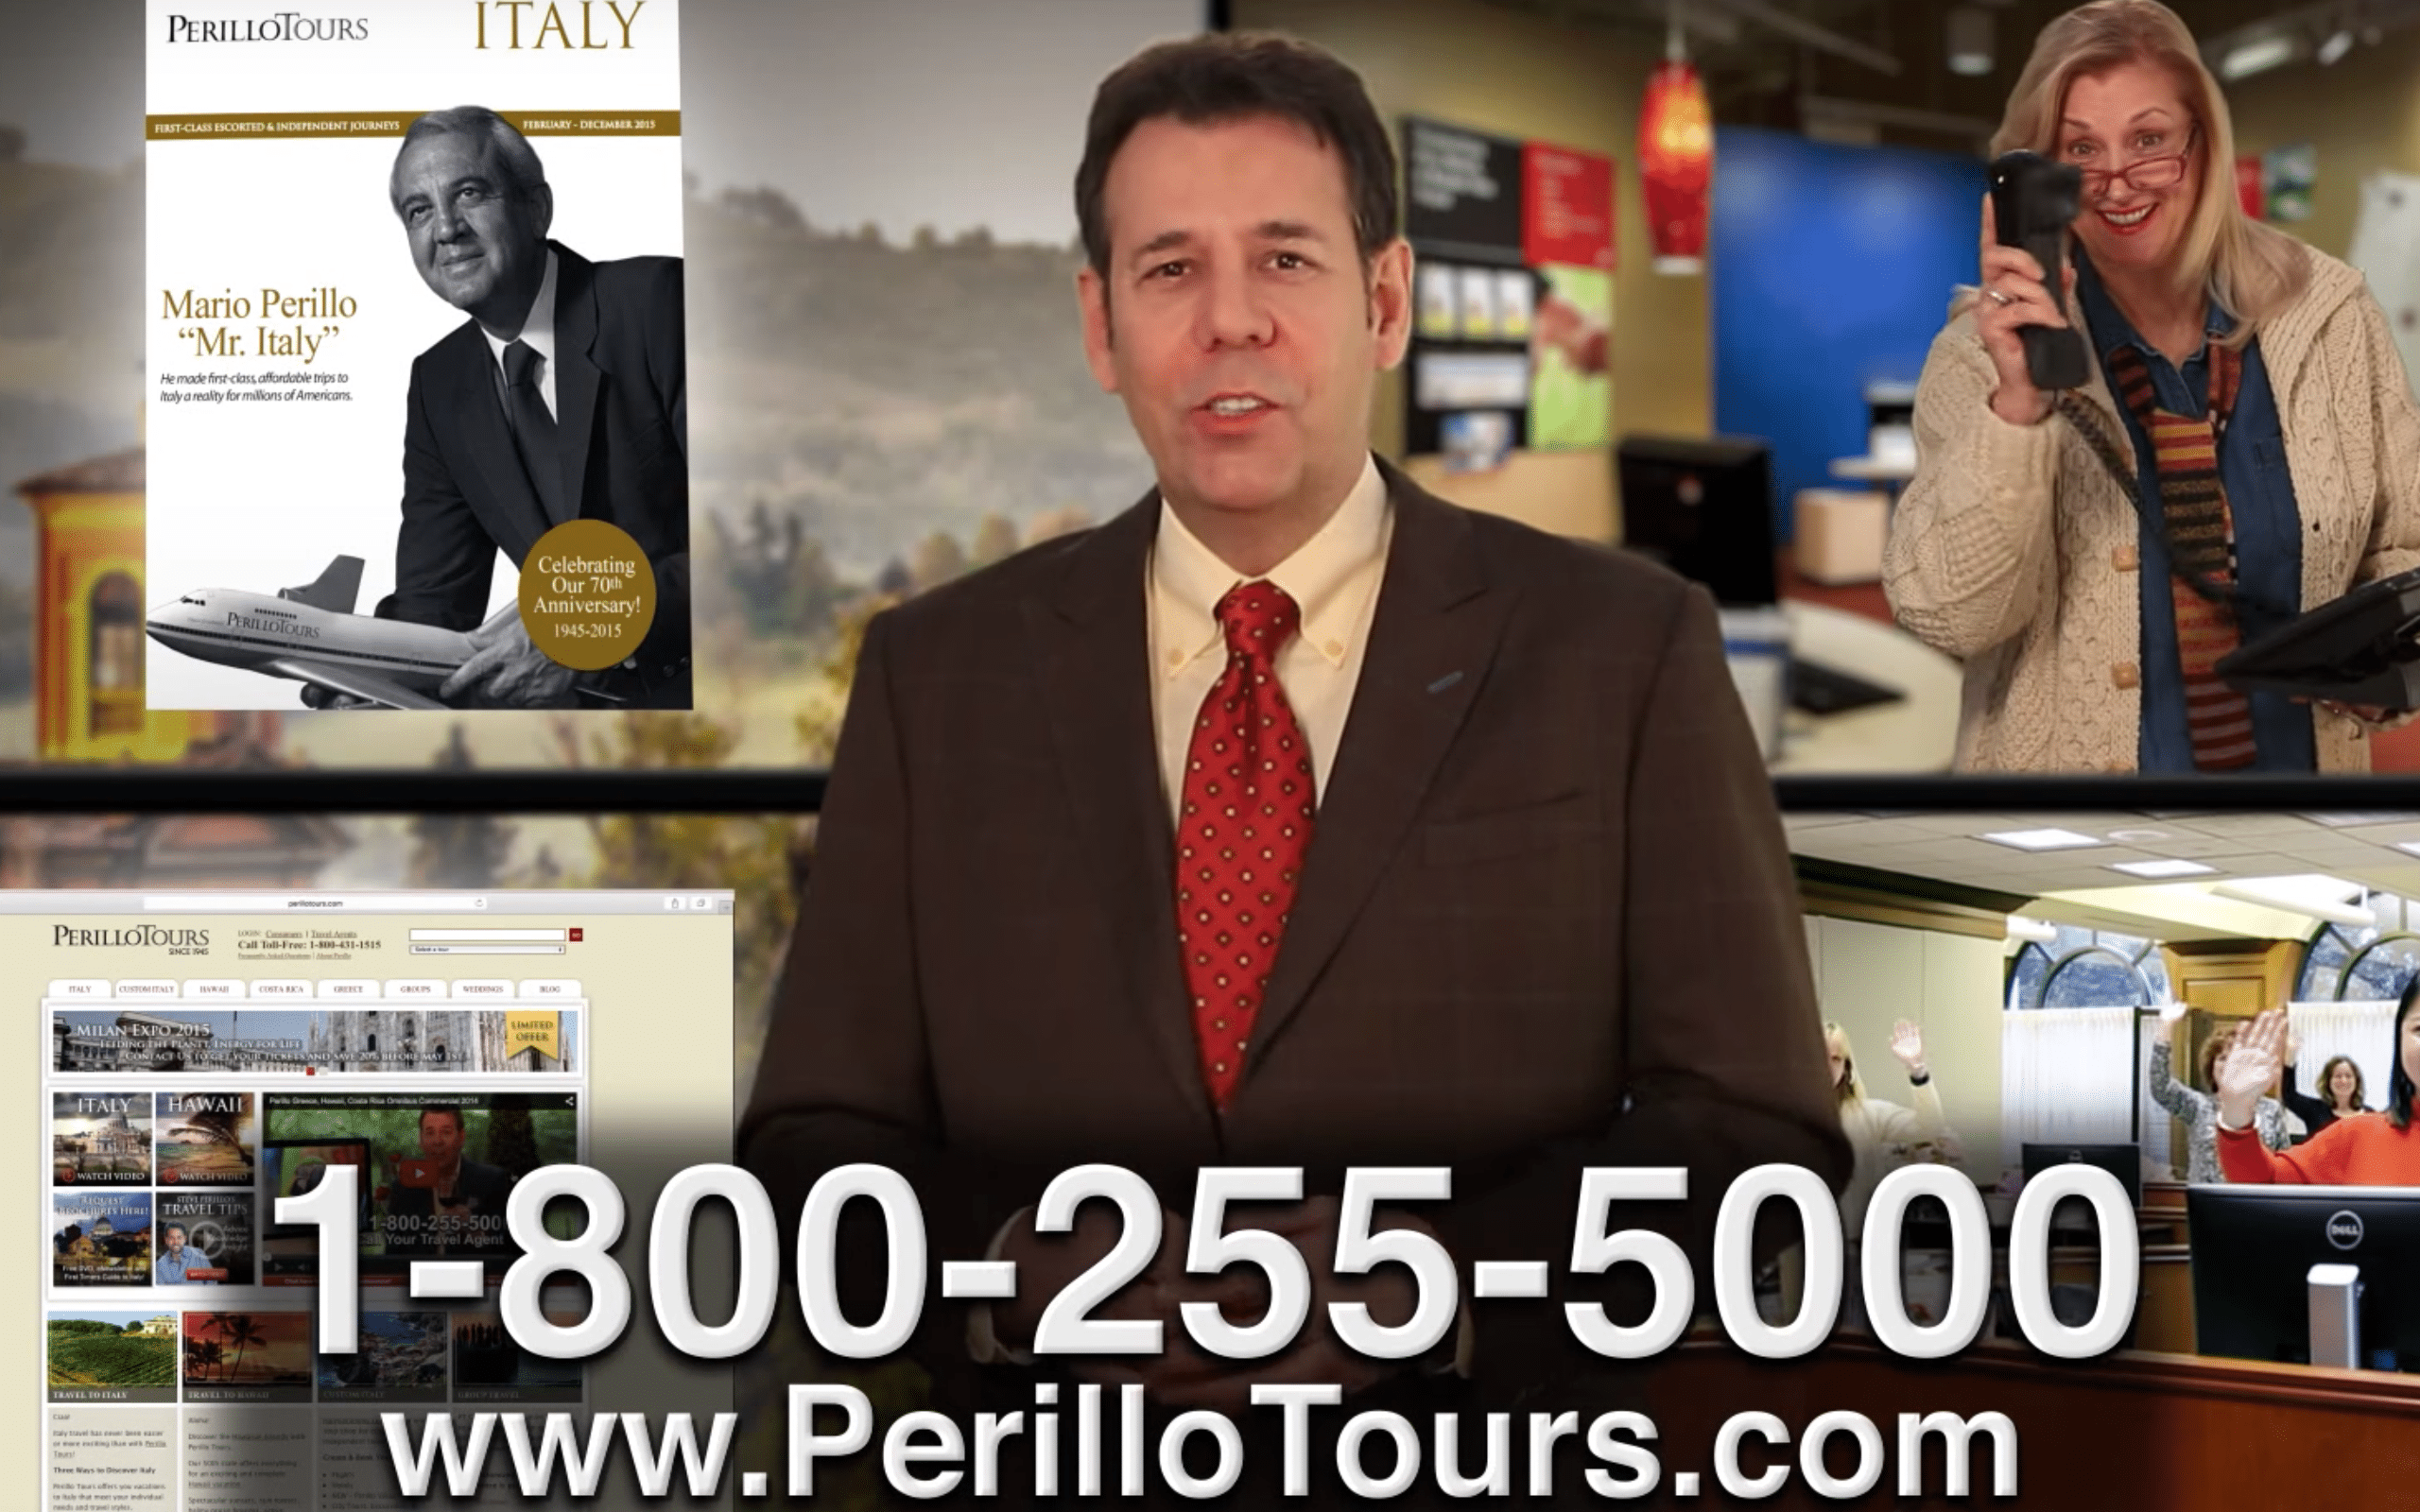 Perillo Tours So Many Ways Commercial, Steve Perillo stands in front of a backdrop collage of images of Mario Perillos book, screen shot of Perillo Tours website, and in action office shots (video production by Merging Media).